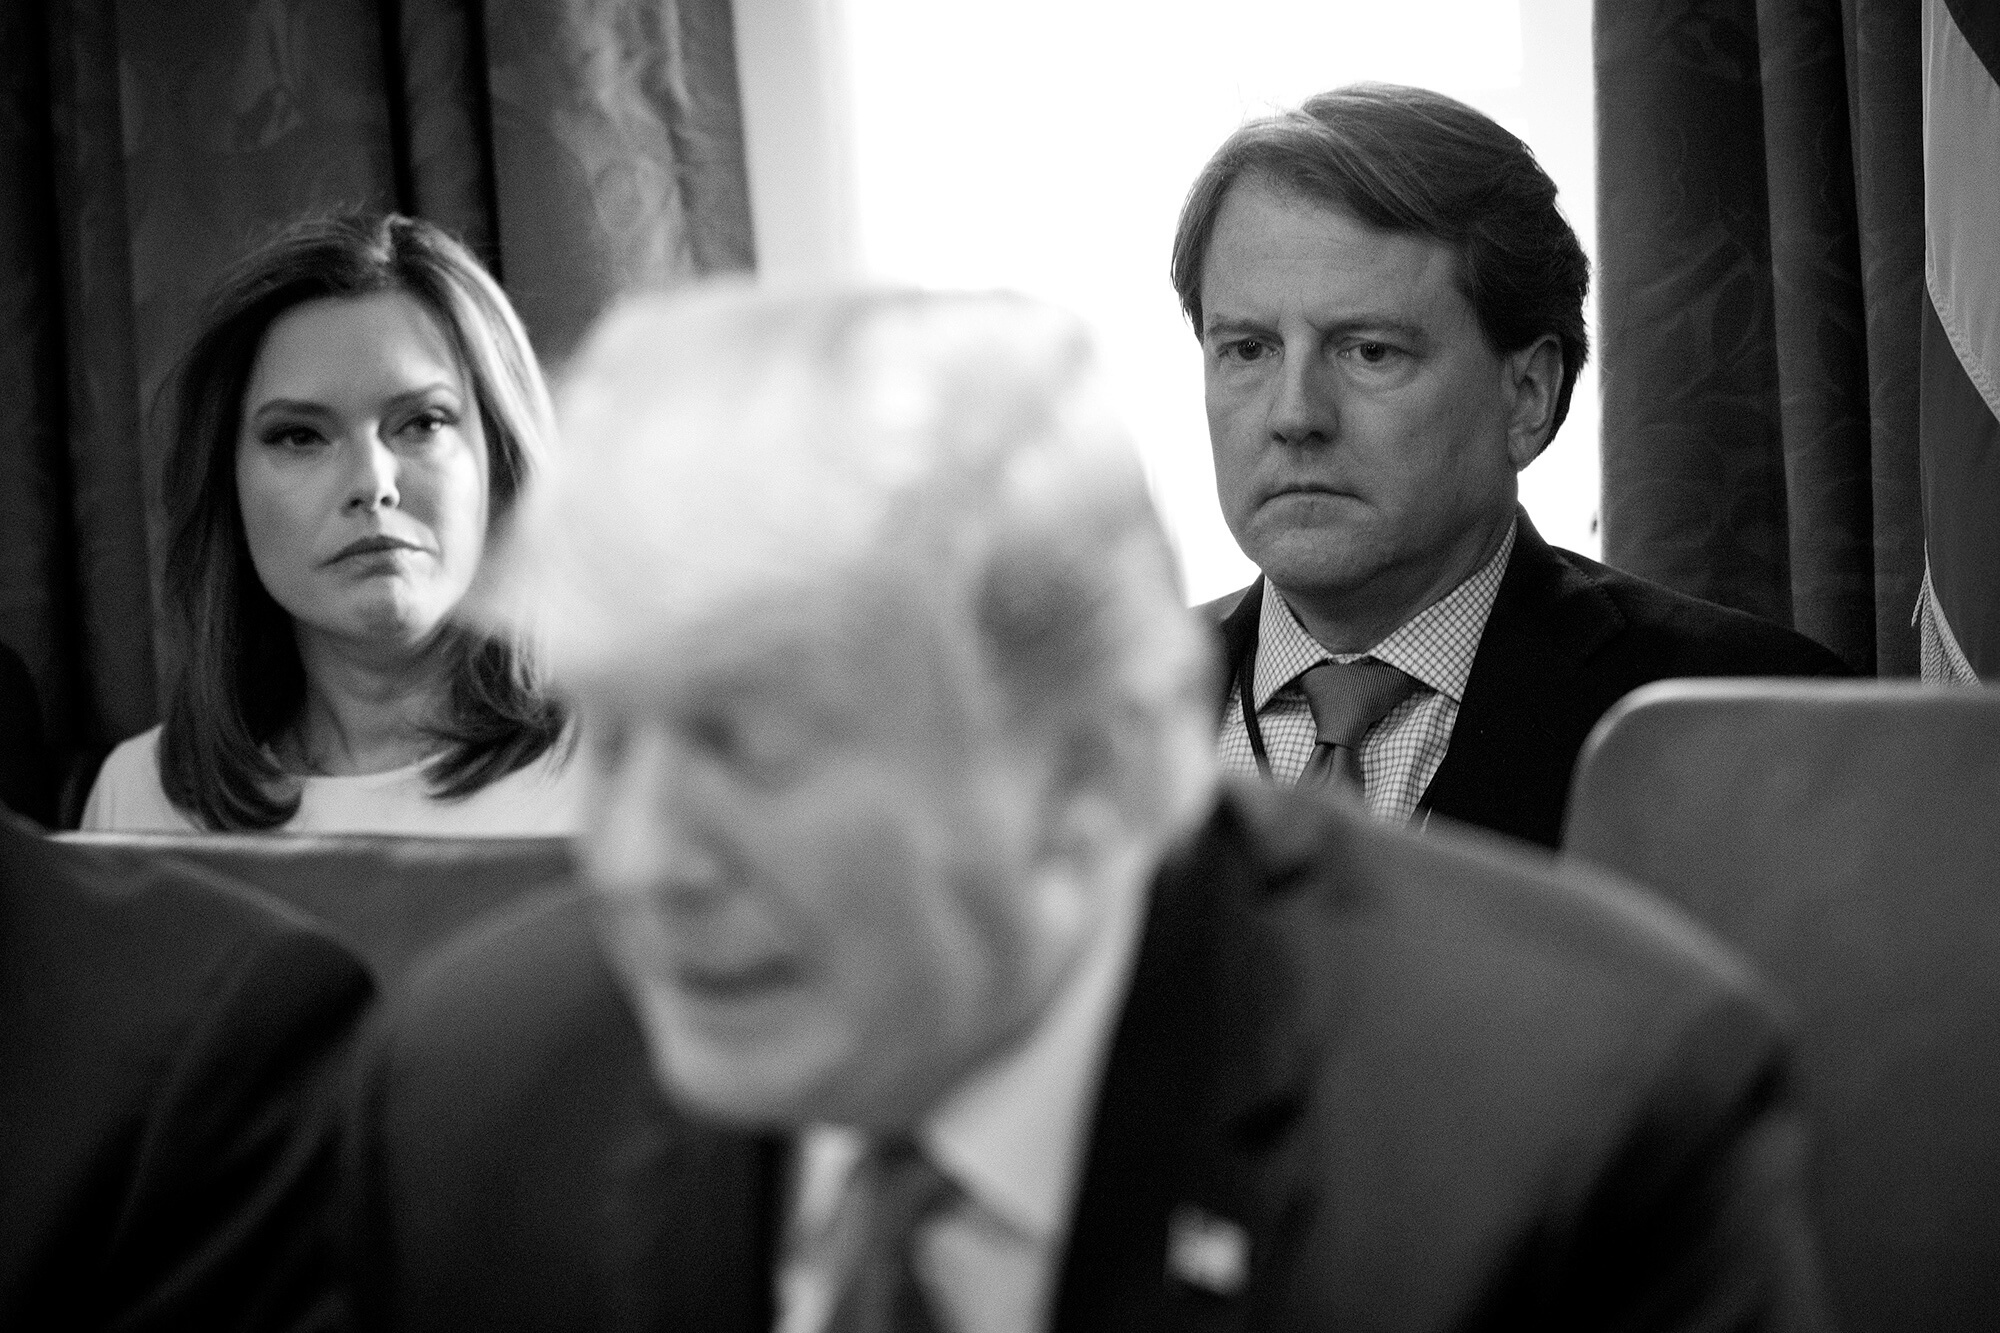 Congressional subpoena power is currently too weak to be an effective check on a corrupt president. Despite efforts by the House of Representatives to demand that Don McGahn, White House counsel under Trump, testify in the Mueller probe, McGahn was able to avoid testifying.